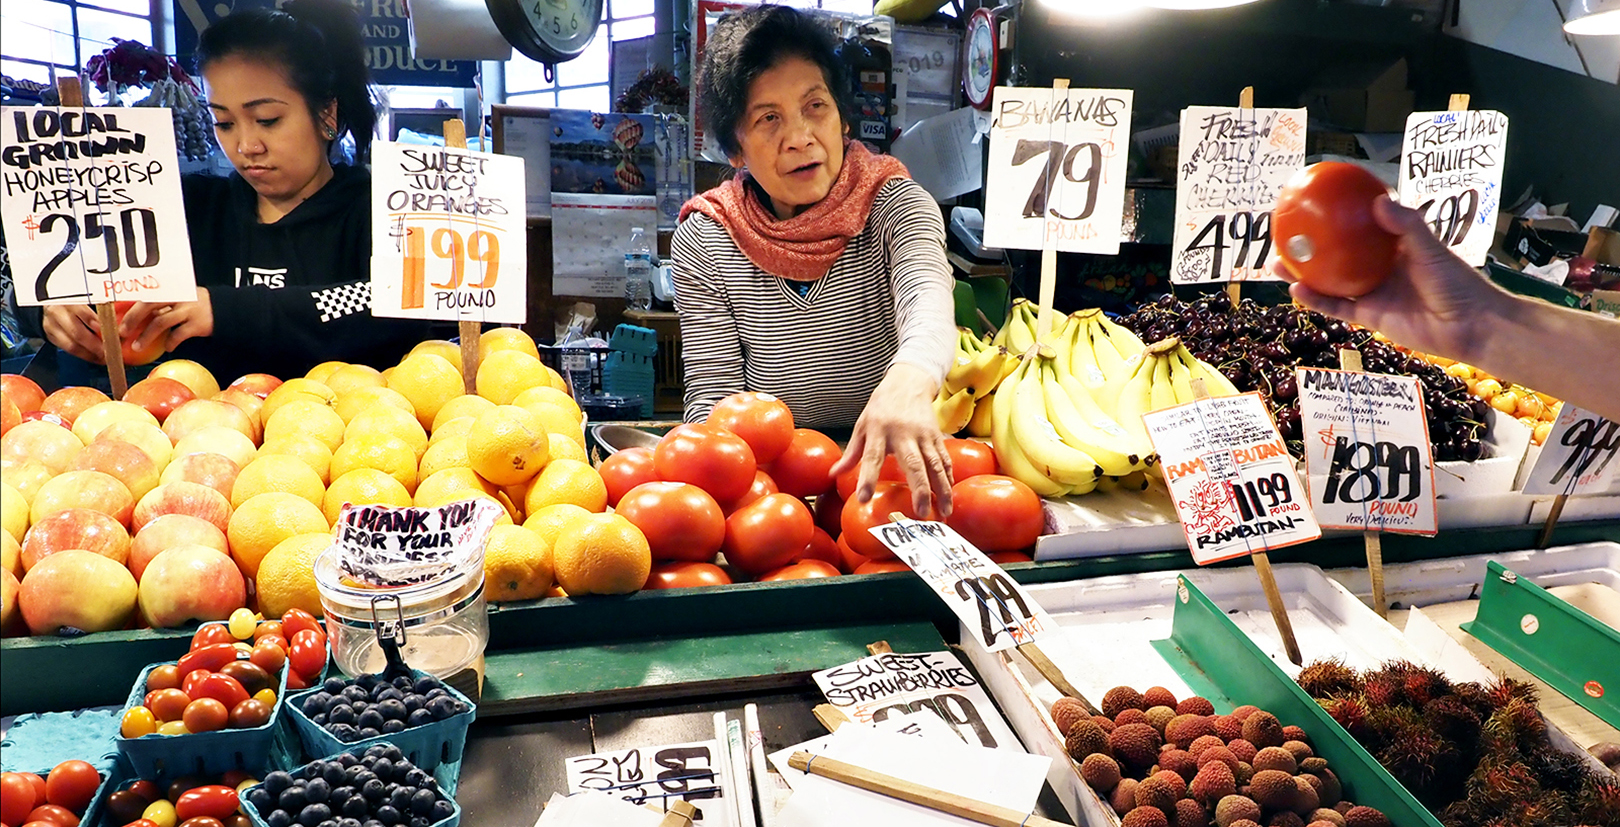 Two women selling produce from a stall in Pike Place Market